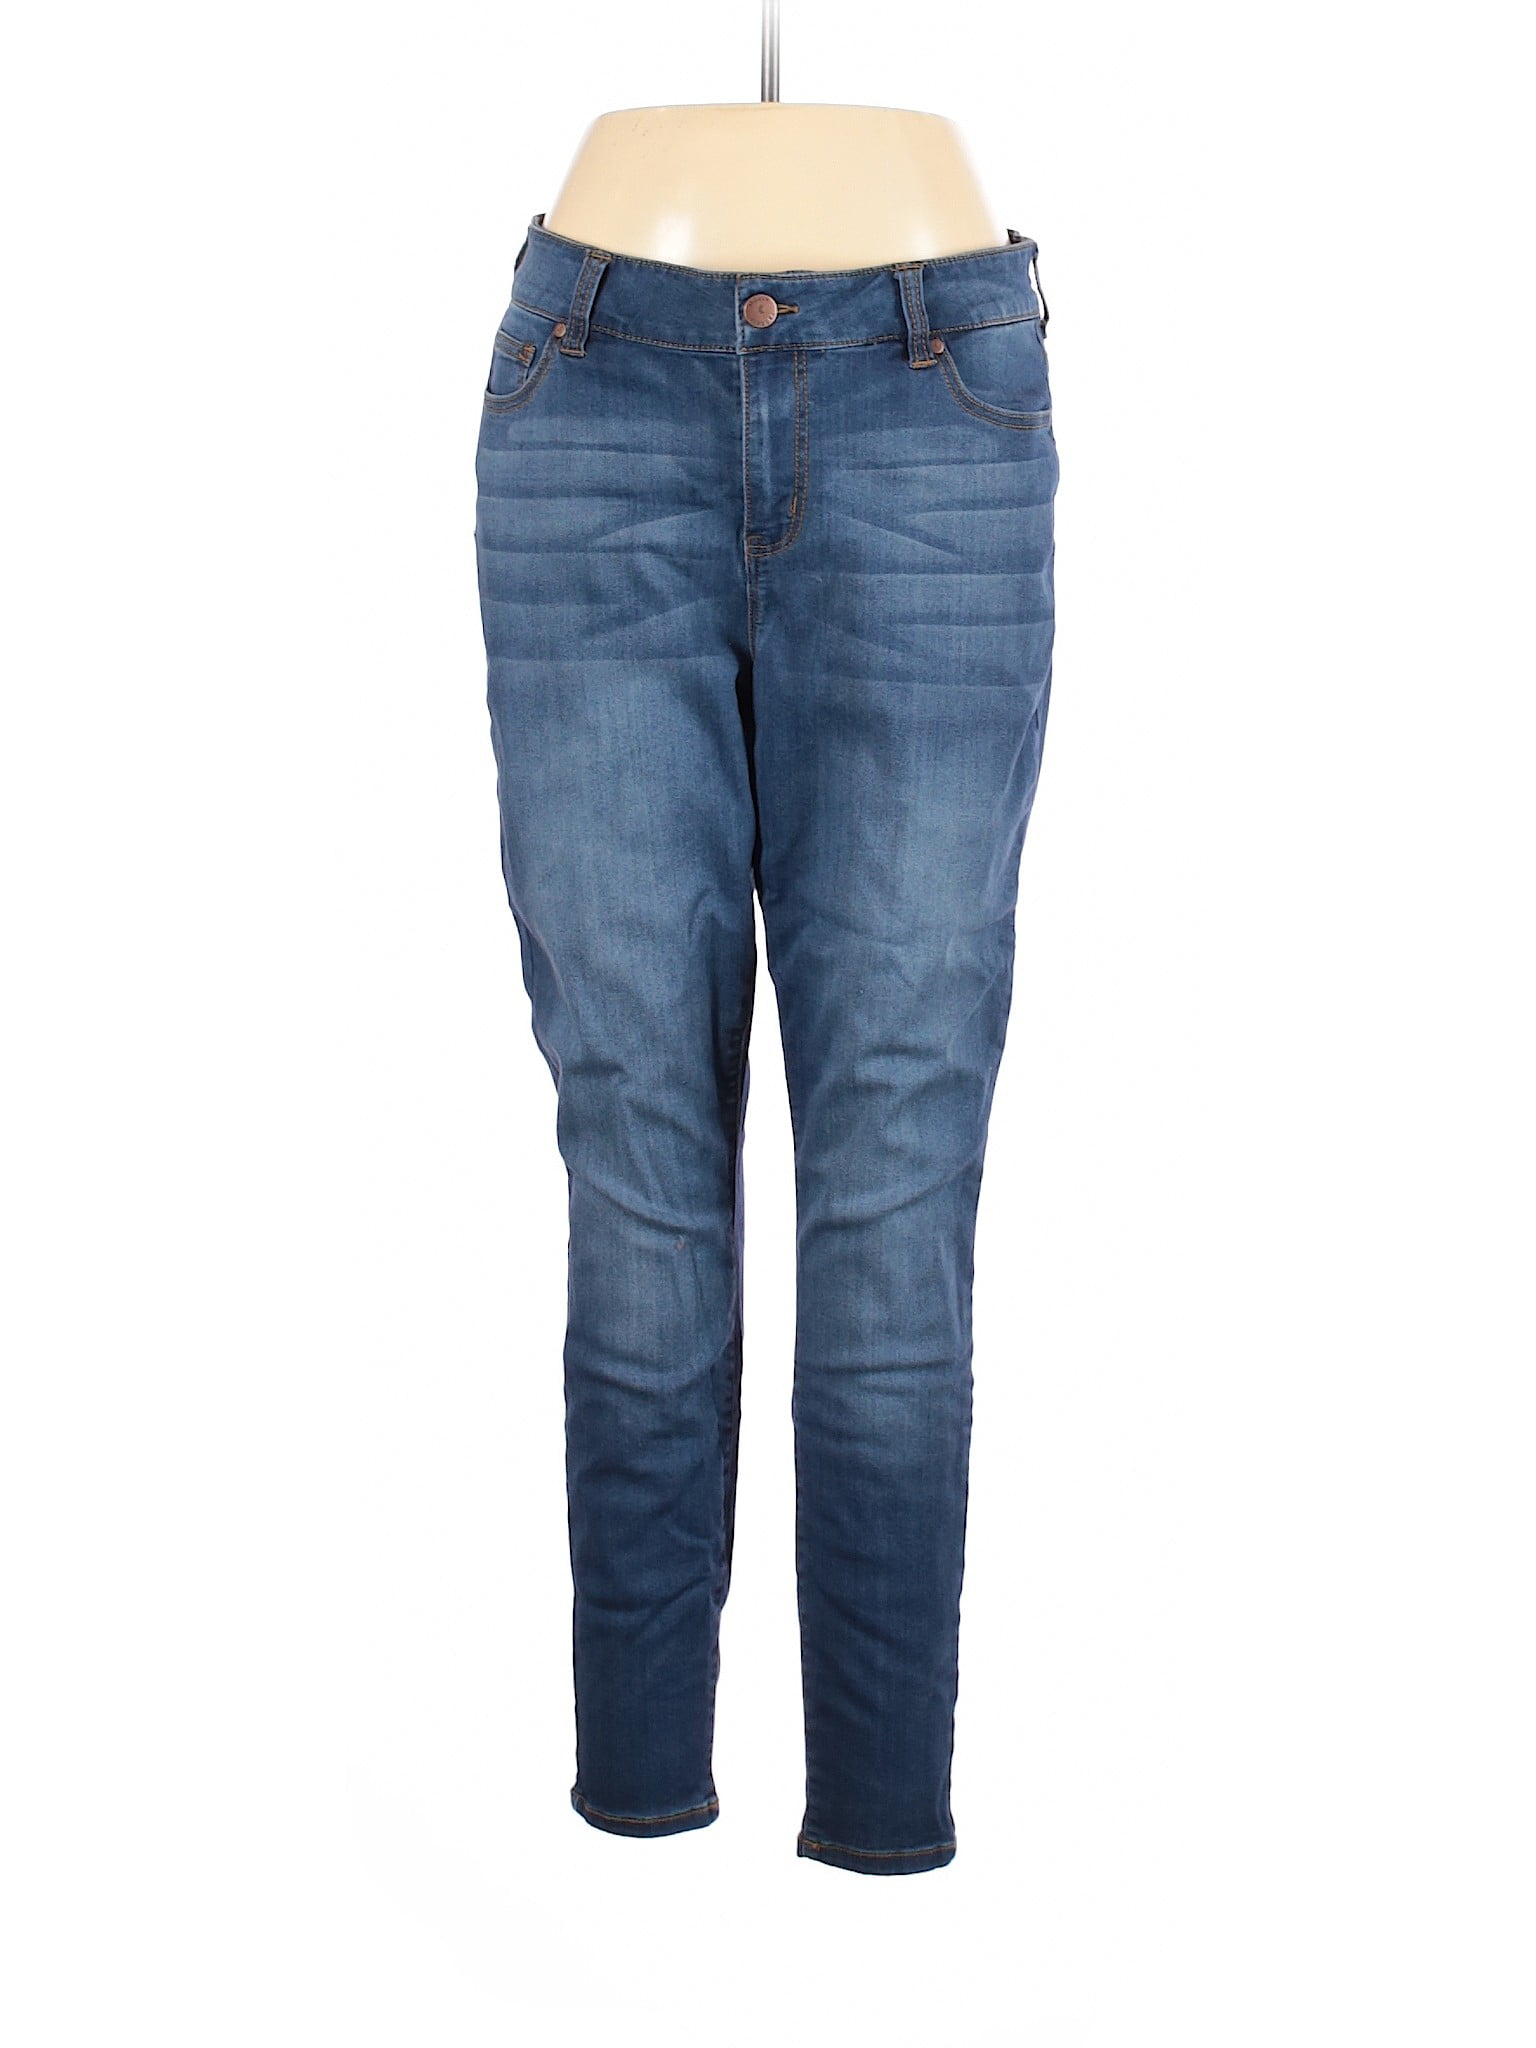 molly and isadora plus size jeans